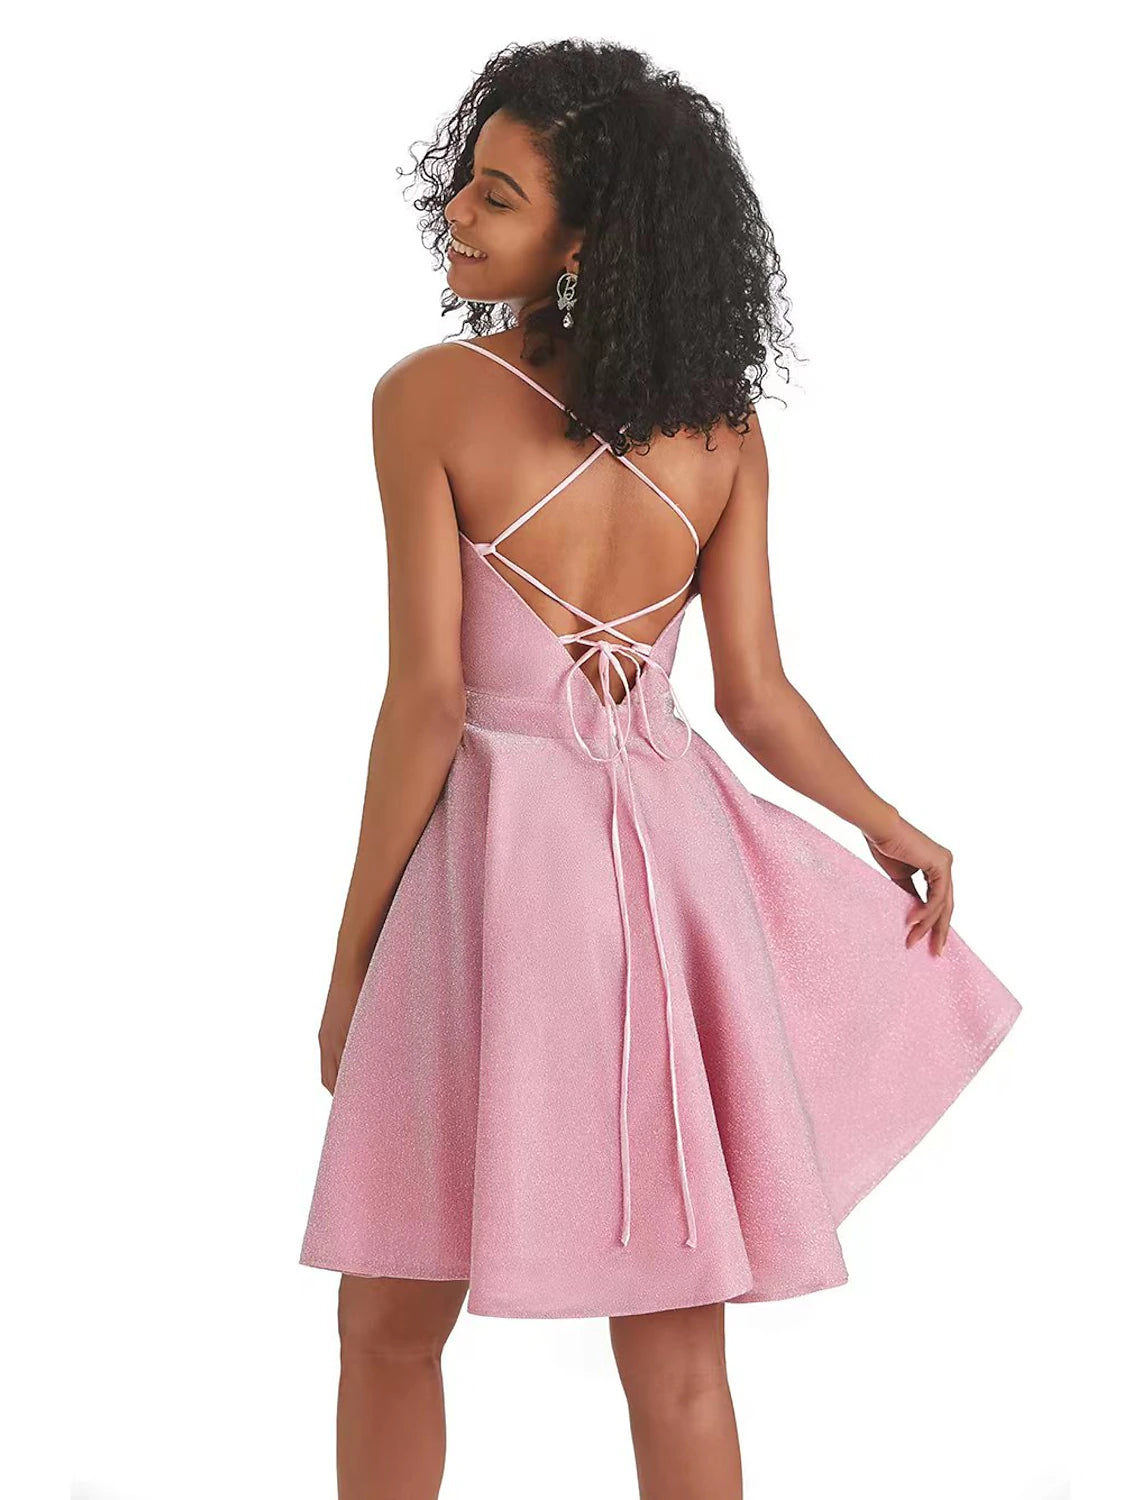 A-Line Homecoming Dresses Backless Dress Graduation Short / Mini Sleeveless Spaghetti Strap Pink Dress Lurex Fabric with Sequin Strappy